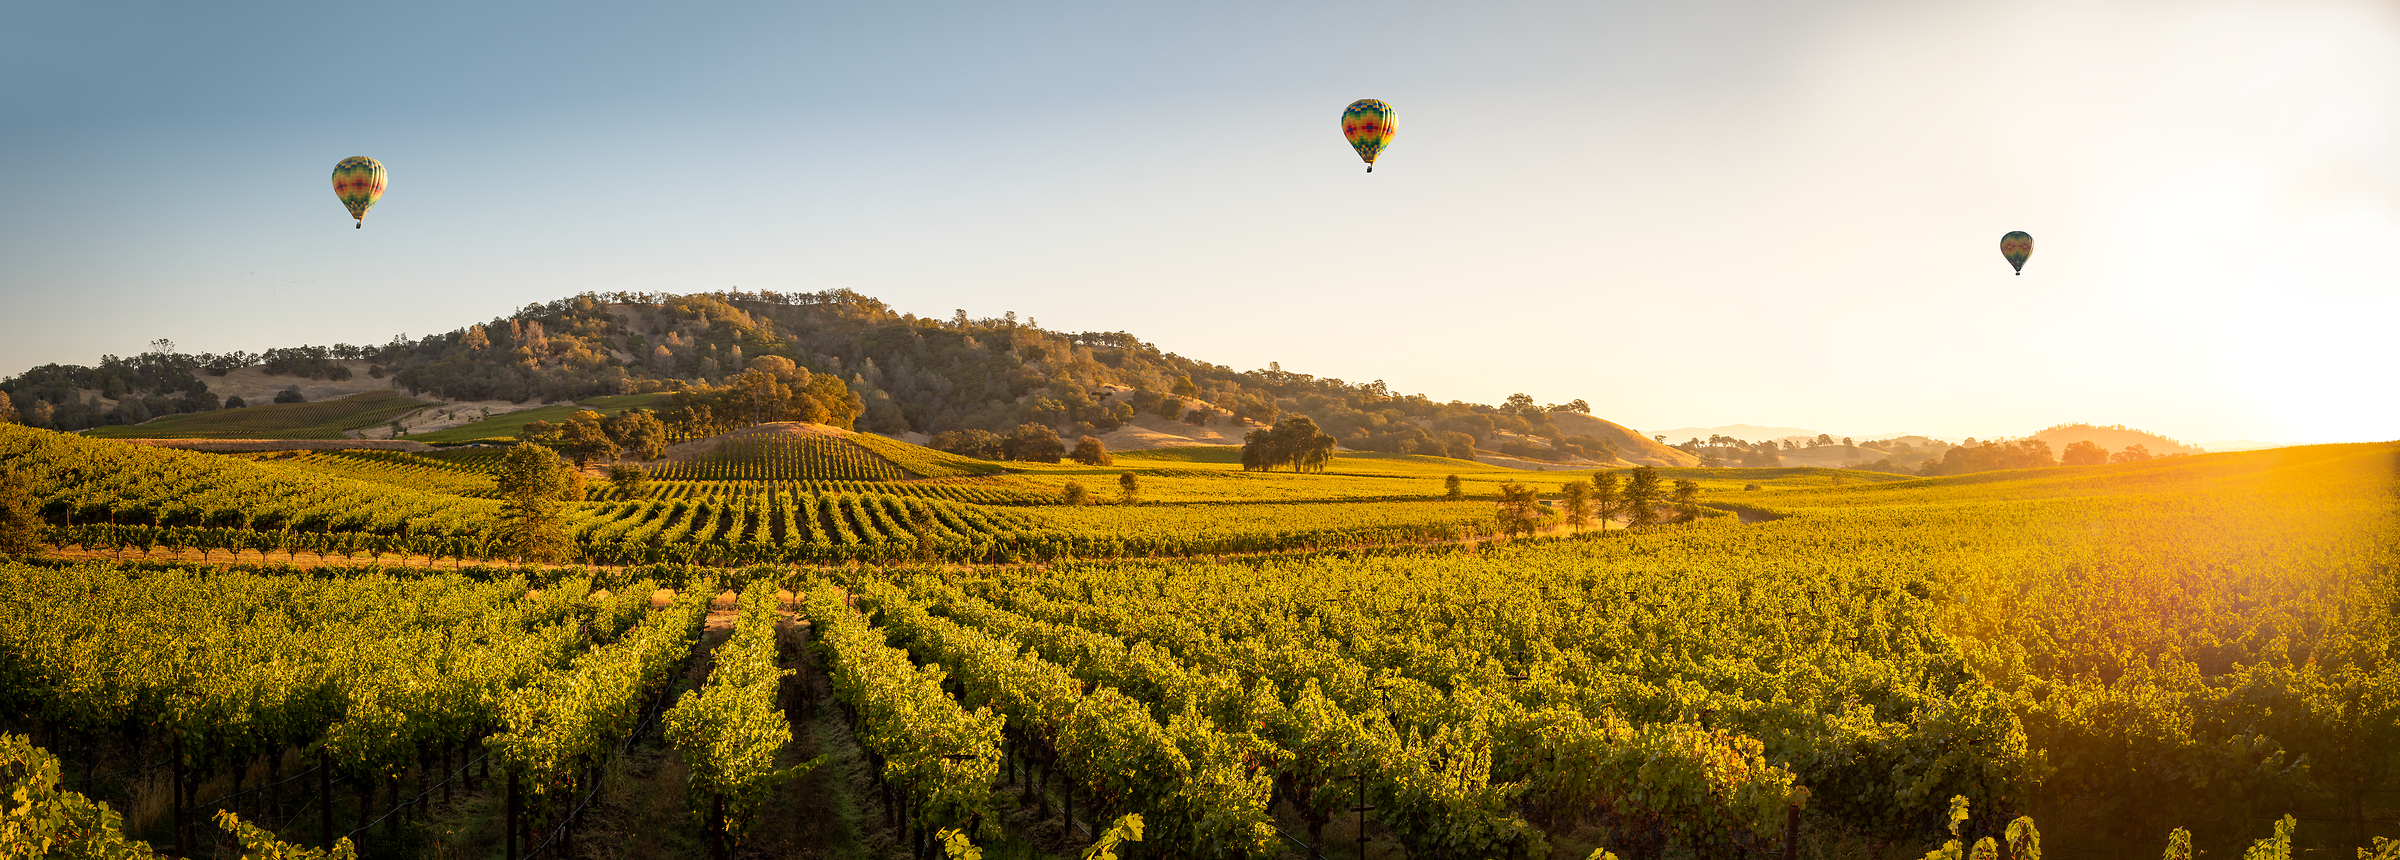 230 megapixels! A very high resolution, large-format VAST photo of a Napa Valley vineyard with hot air balloons and sunlight; landscape photo created by Justin Katz in Pope Valley, Napa Valley, California.